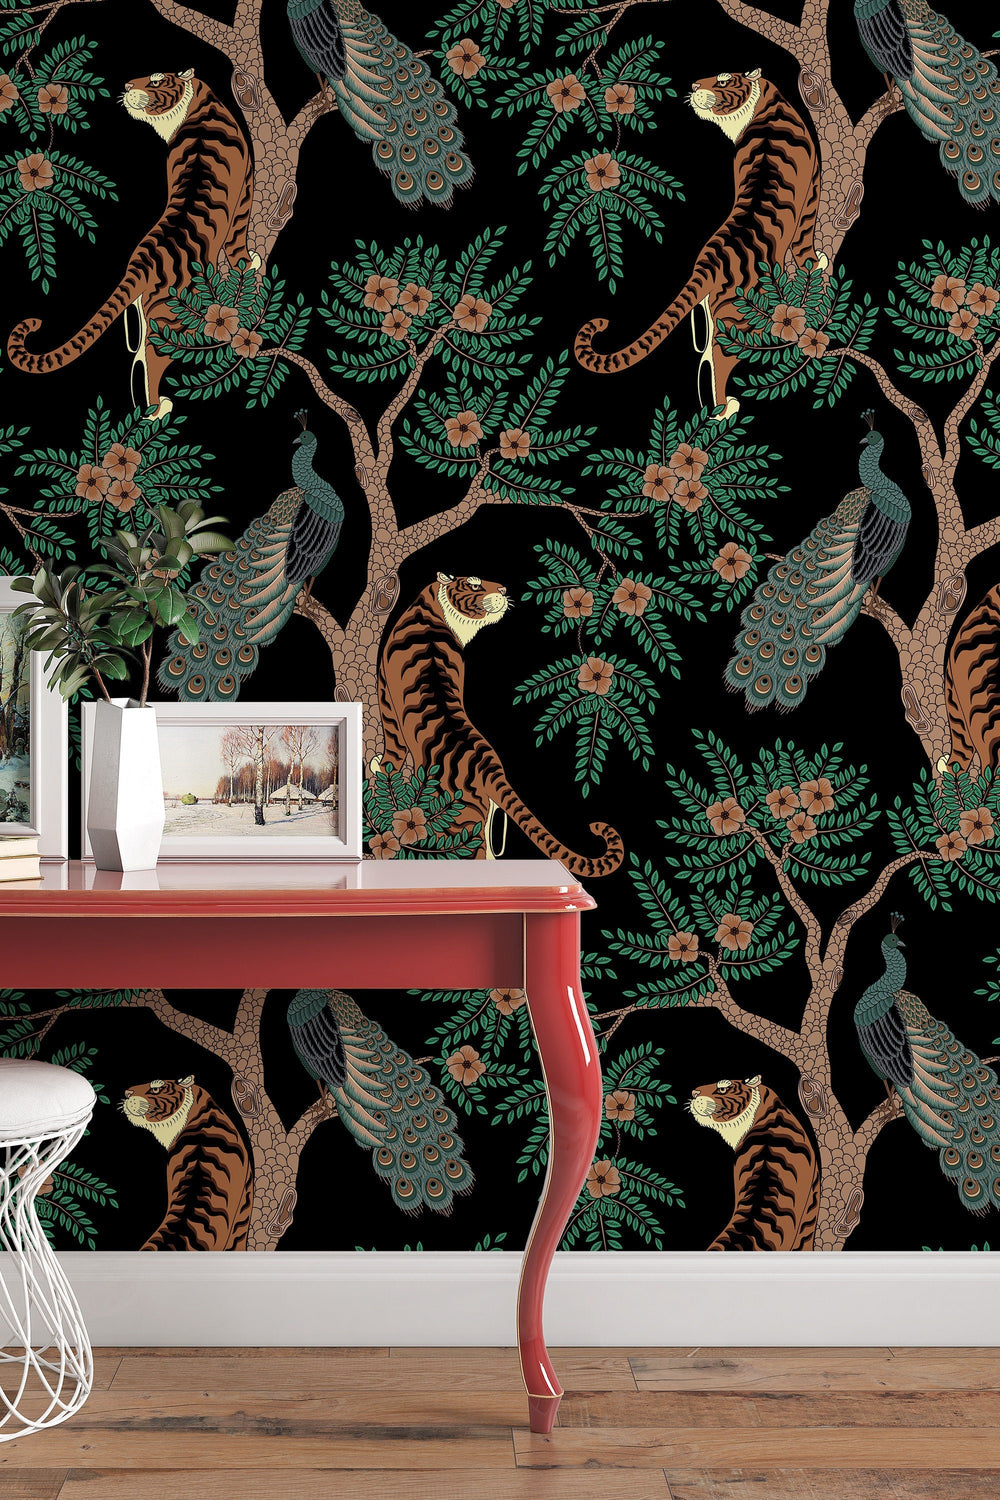 Tigesr and Peacocks in the garden on the black background, animals - Peel & Stick Wallpaper - Removable Self Adhesive #3212 /1040